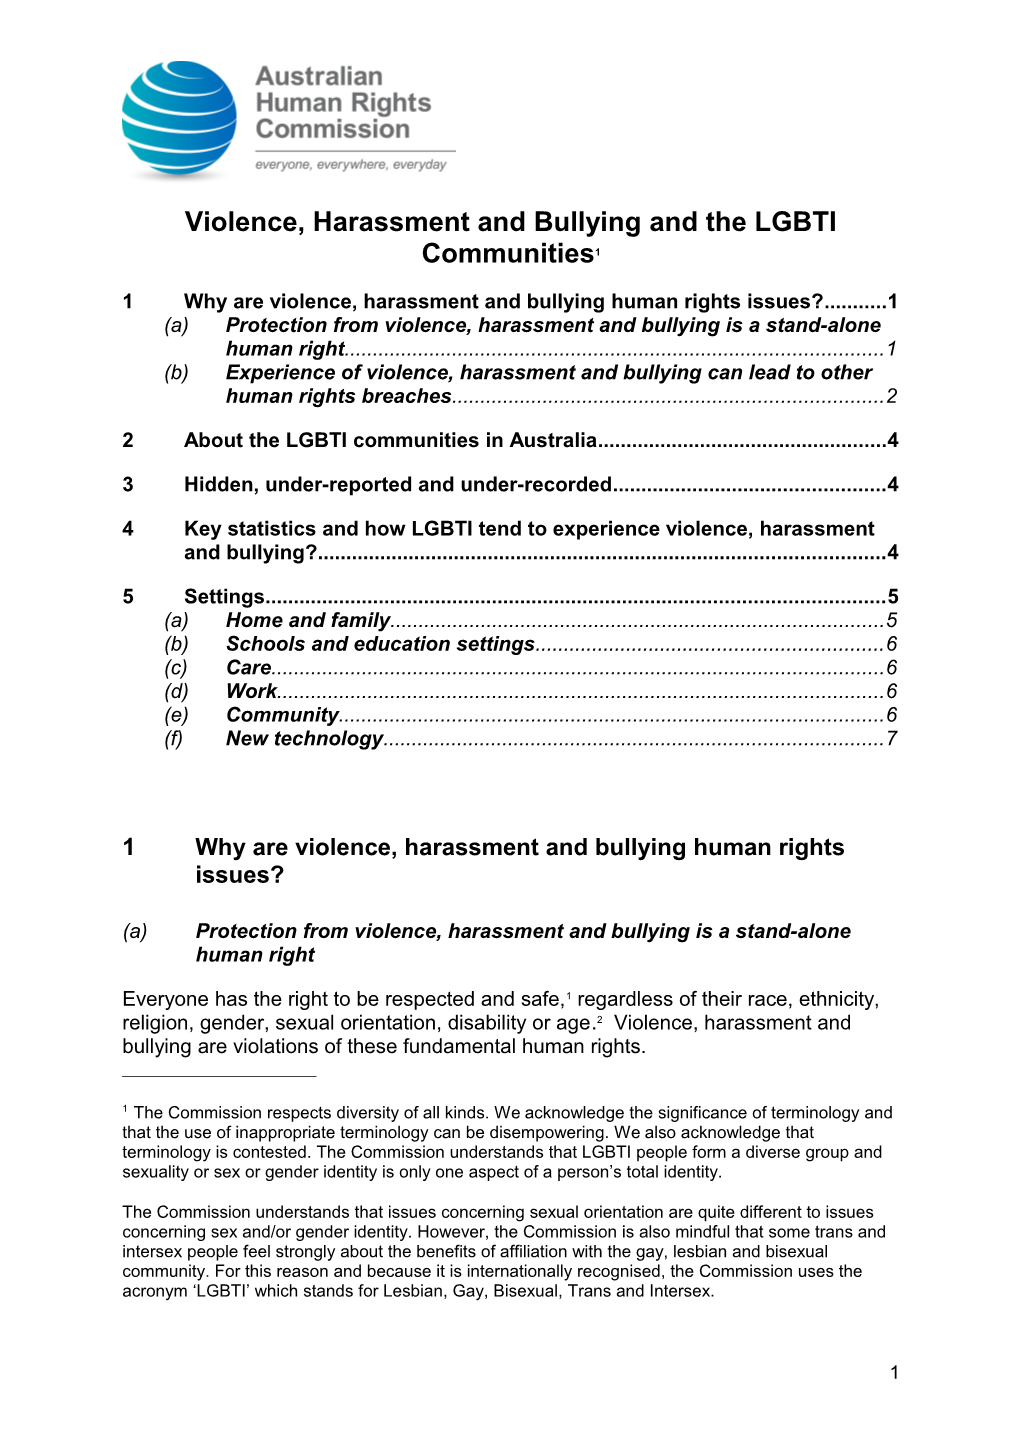 1Why Are Violence, Harassment and Bullying Human Rights Issues?